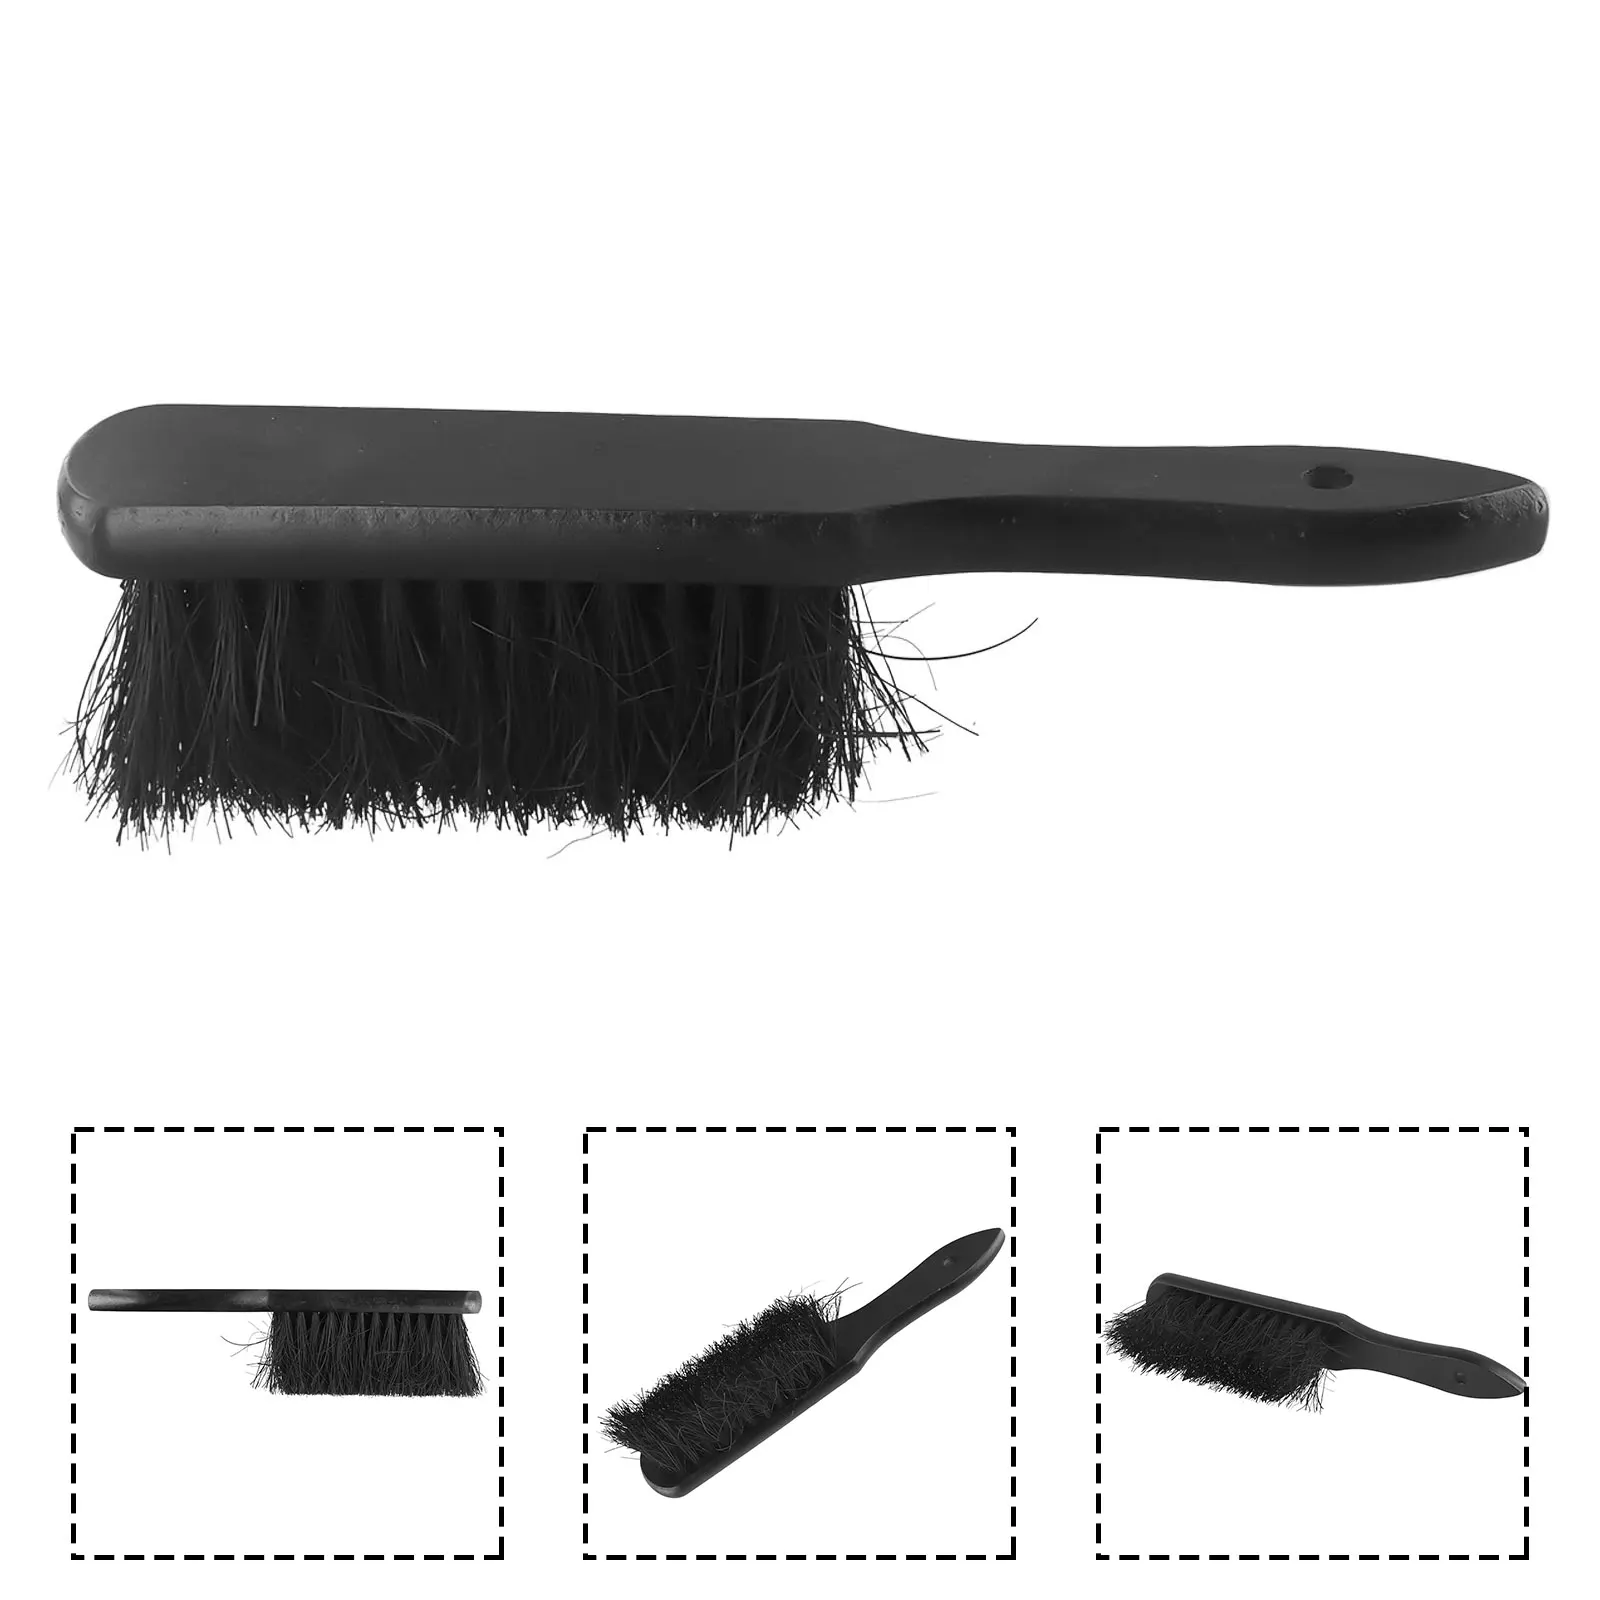 

New Home Stoves Fireplace Brush Coconut Palm Bristles Fireside Shape Tool Useful 1PCS 28.5cm*4.5cm Accessories